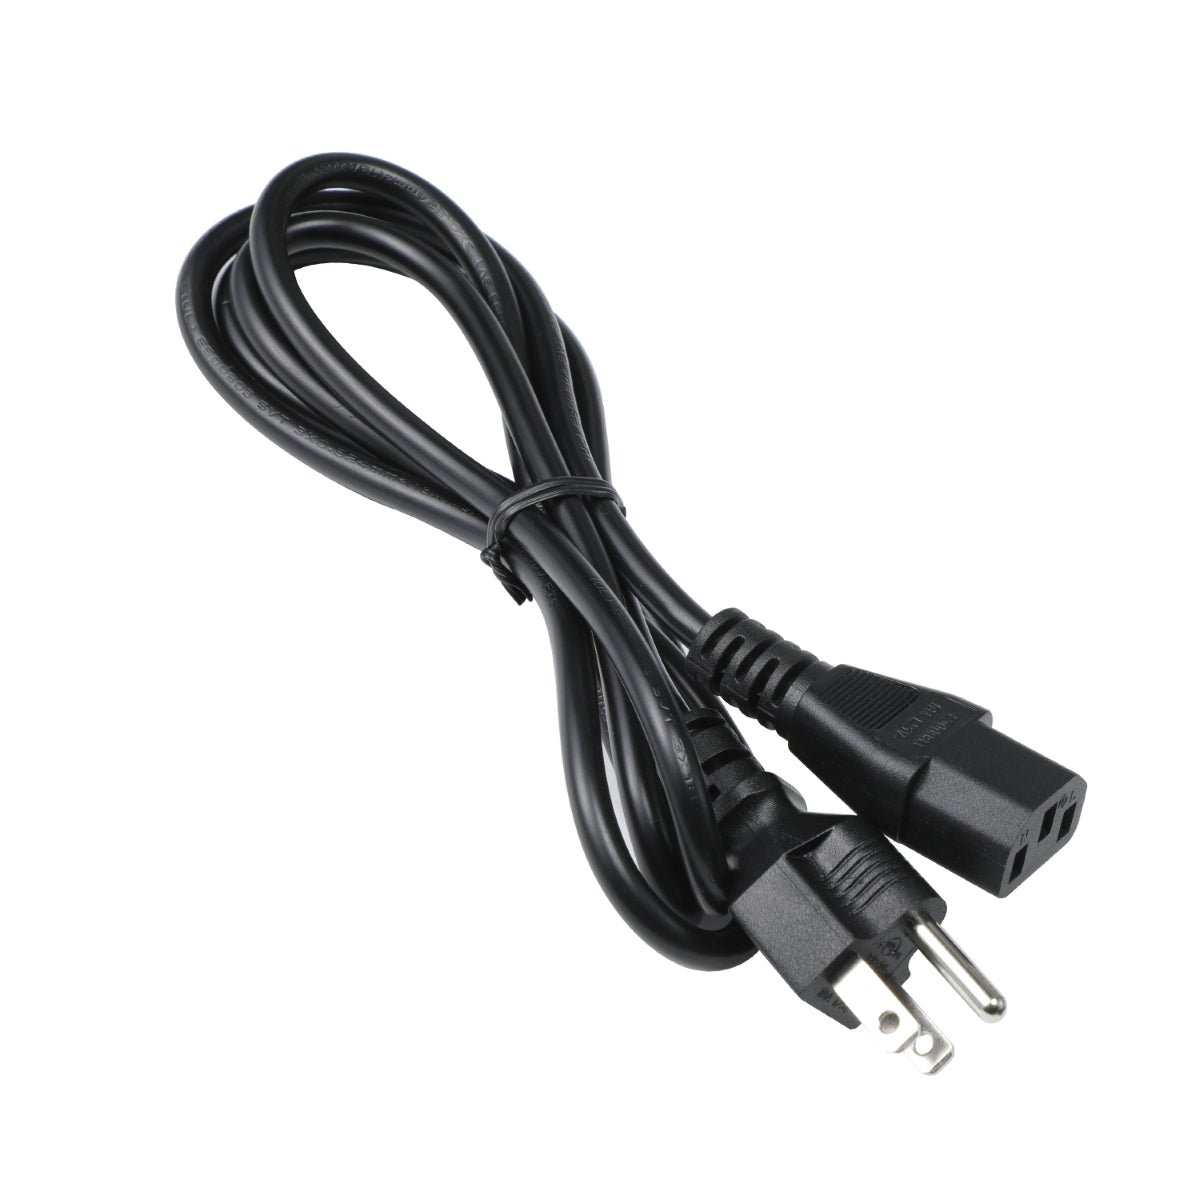 Power Cord for Dell Inspiron 3668 Tower Desktop.